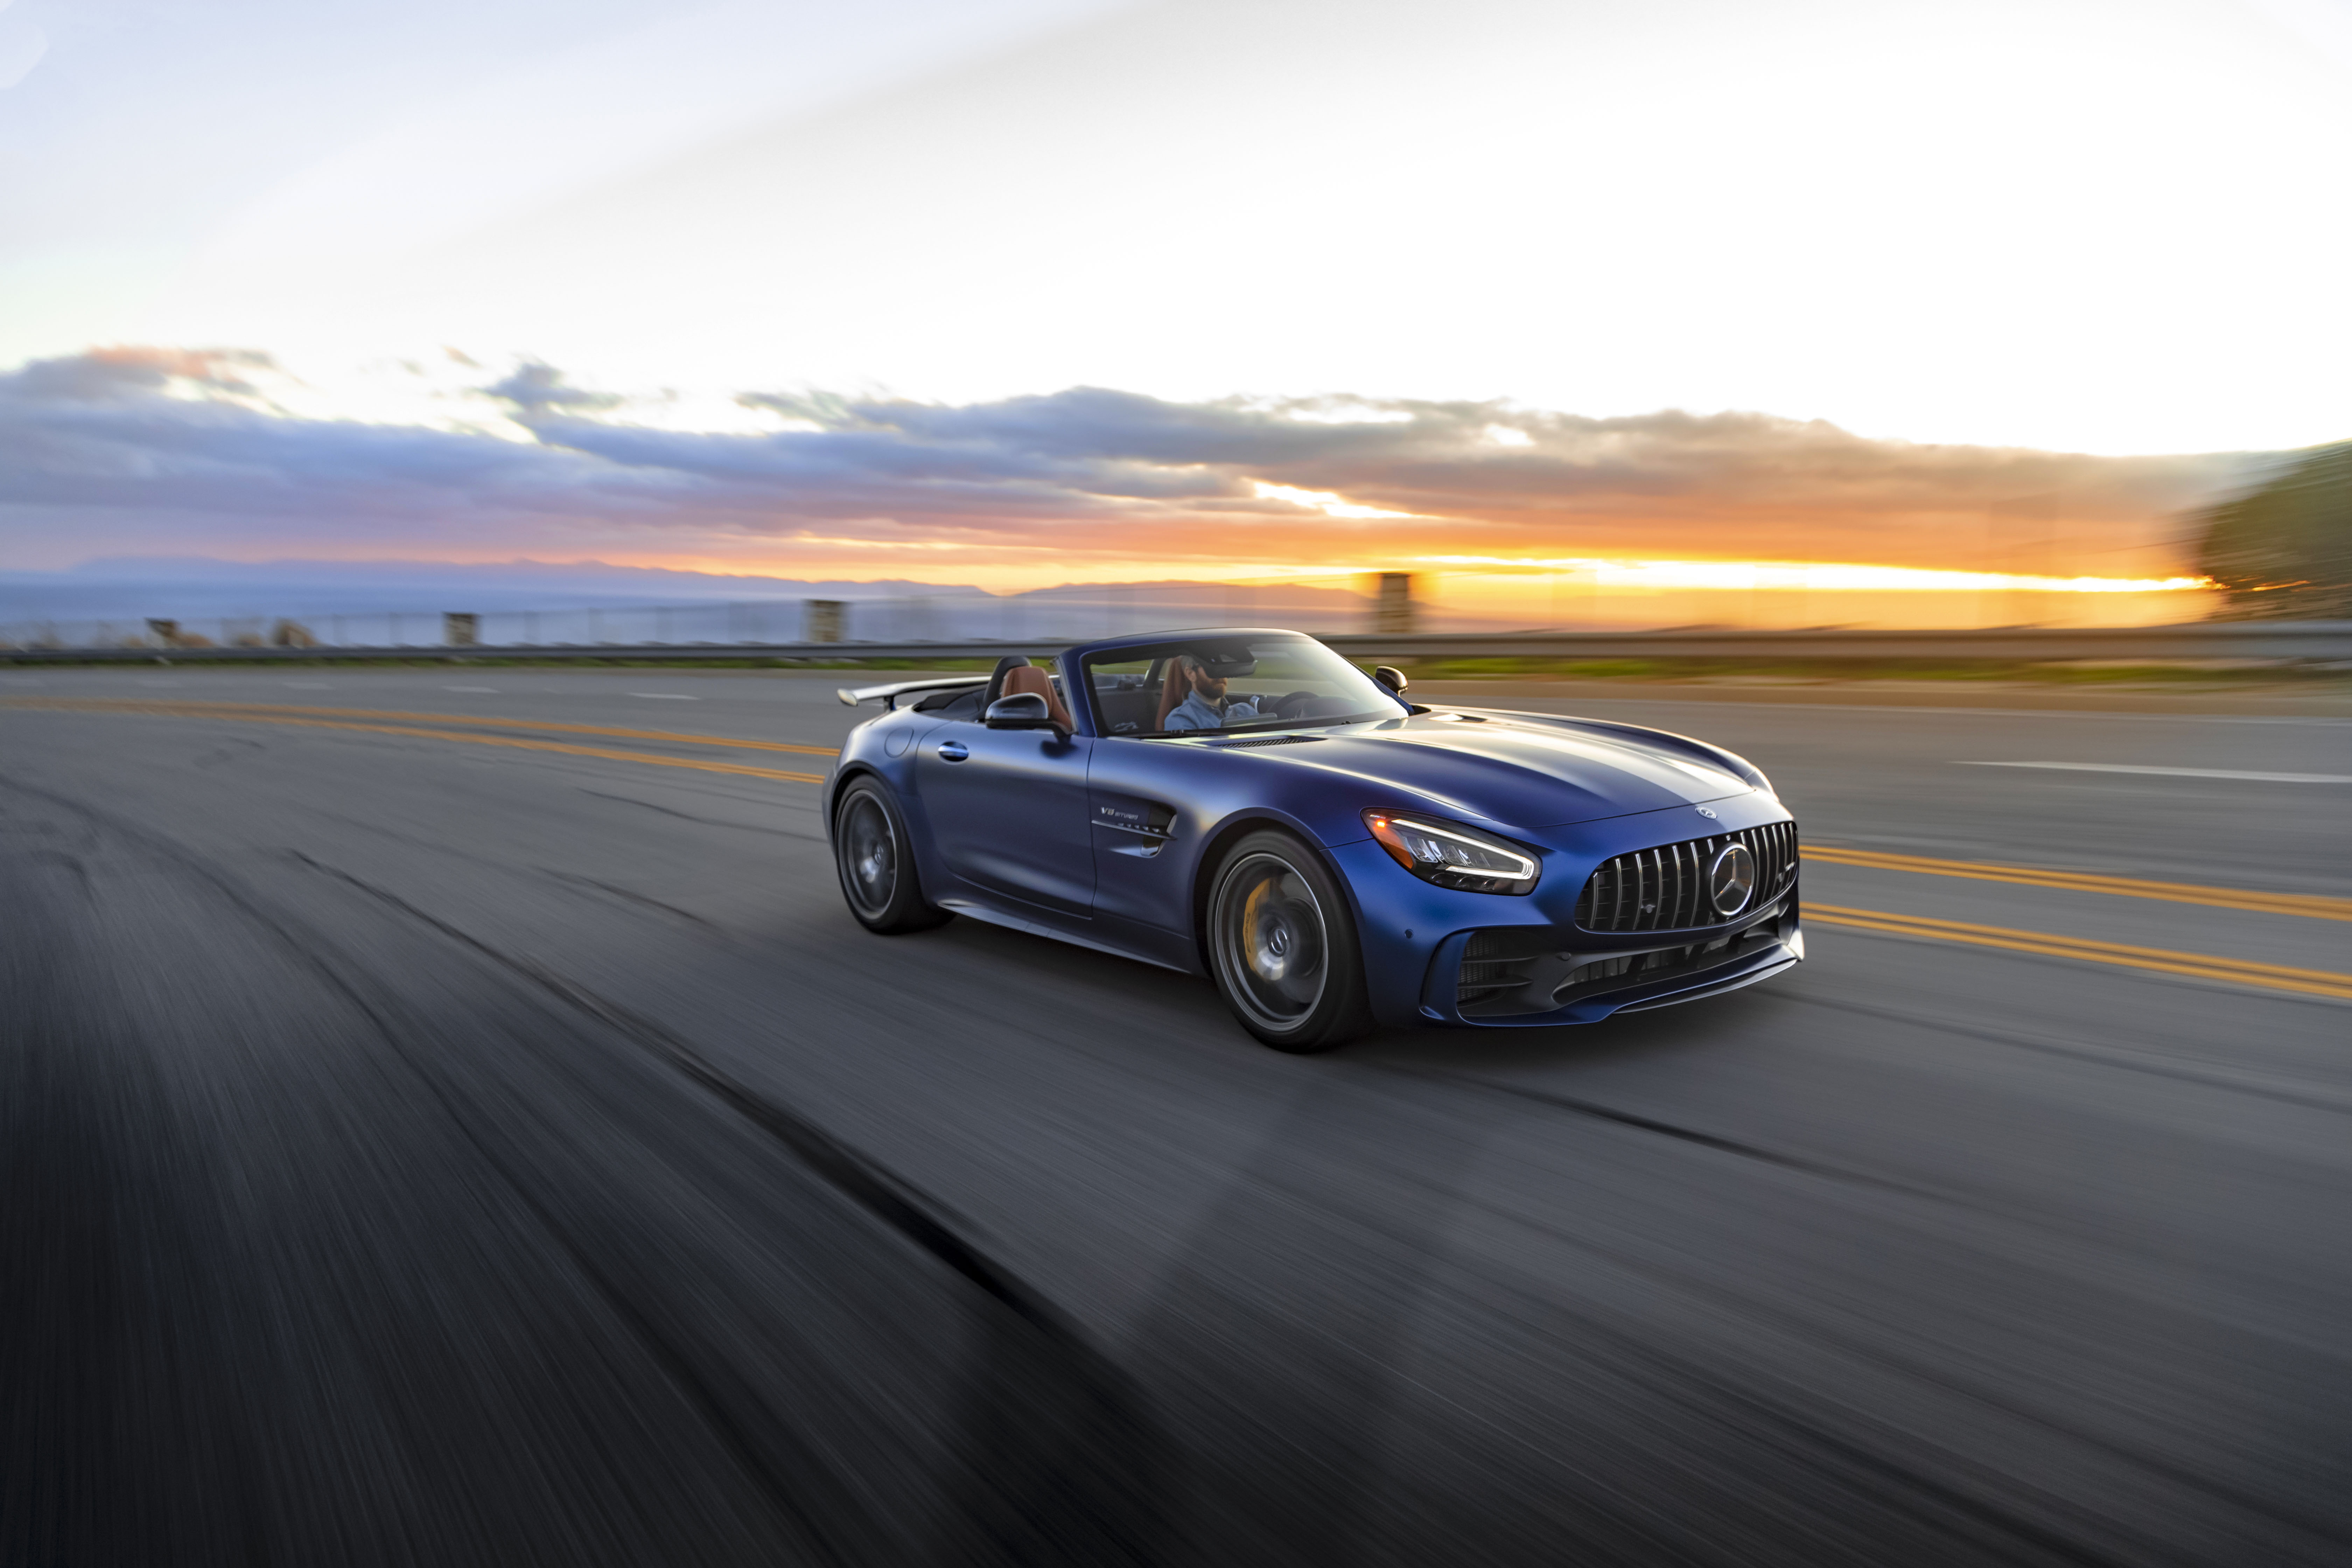 Mercedes AMG GT Roadster (R190) hd specifications